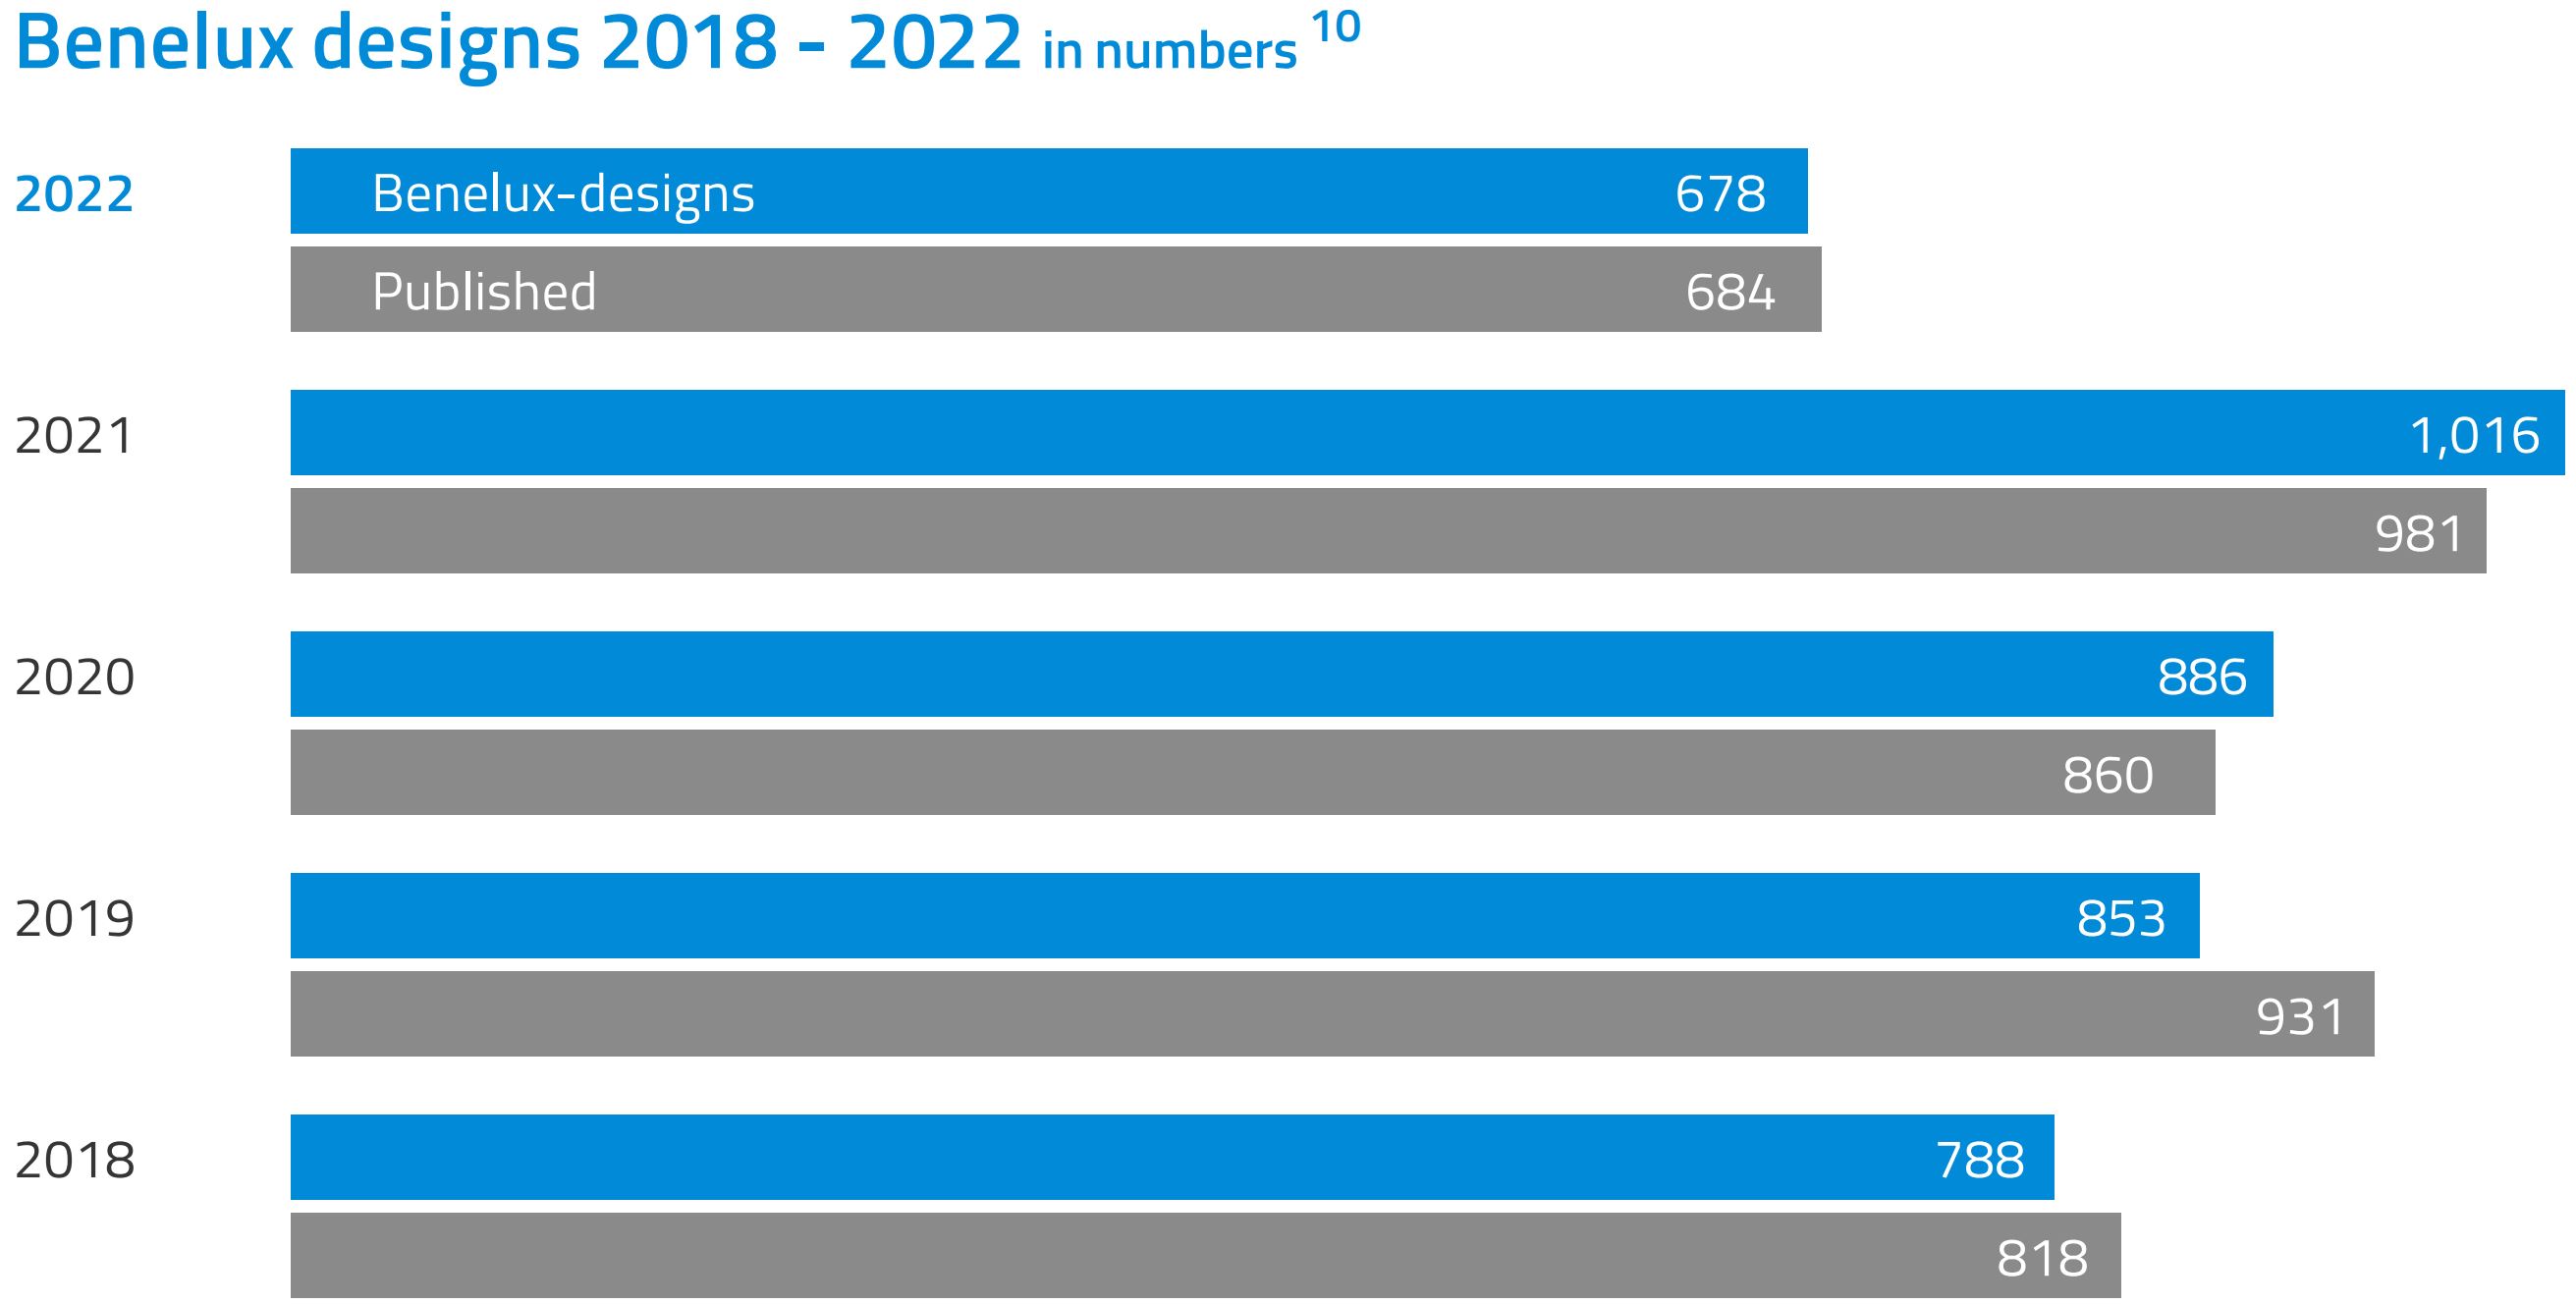 Bar chart Benelux designs 2018-2022 in numbers. Key results: 2022, Benelux models: 678, published: 684. This is both less than the previous 4 years.